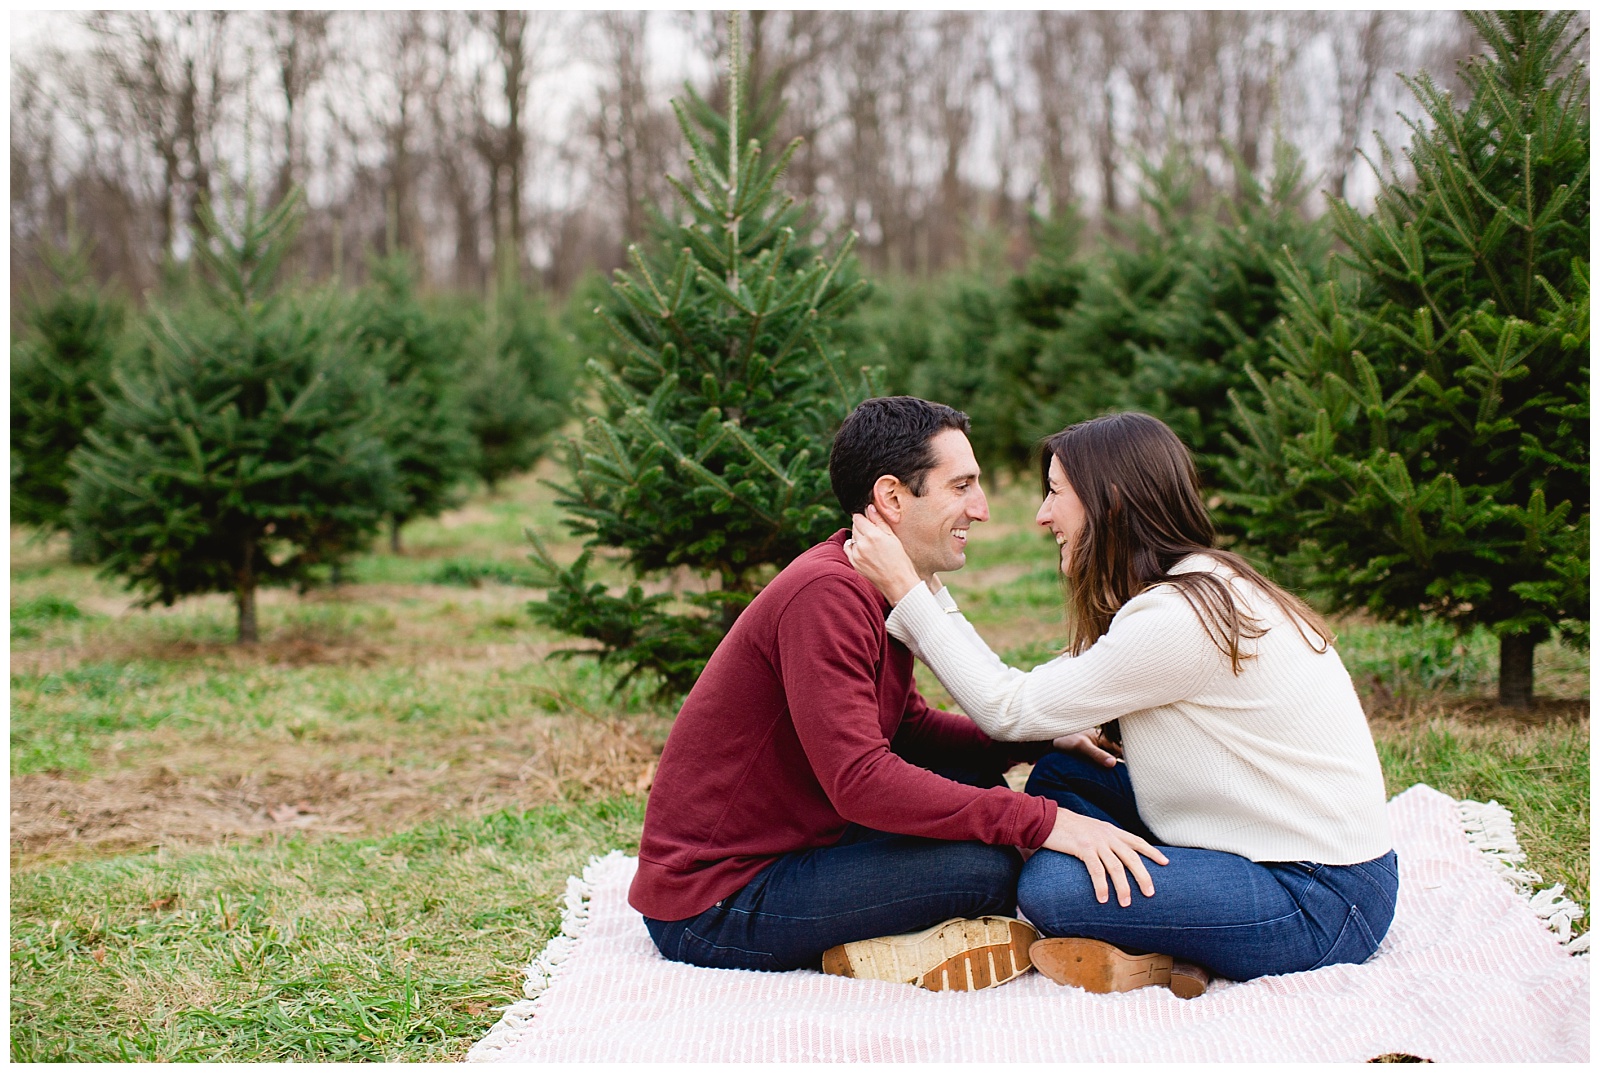 mendham new jersey engagement photography christmas enagegement christmas tree farm christmas tree farm engagement session engagement session ideas engagement session inspo winter engagement session